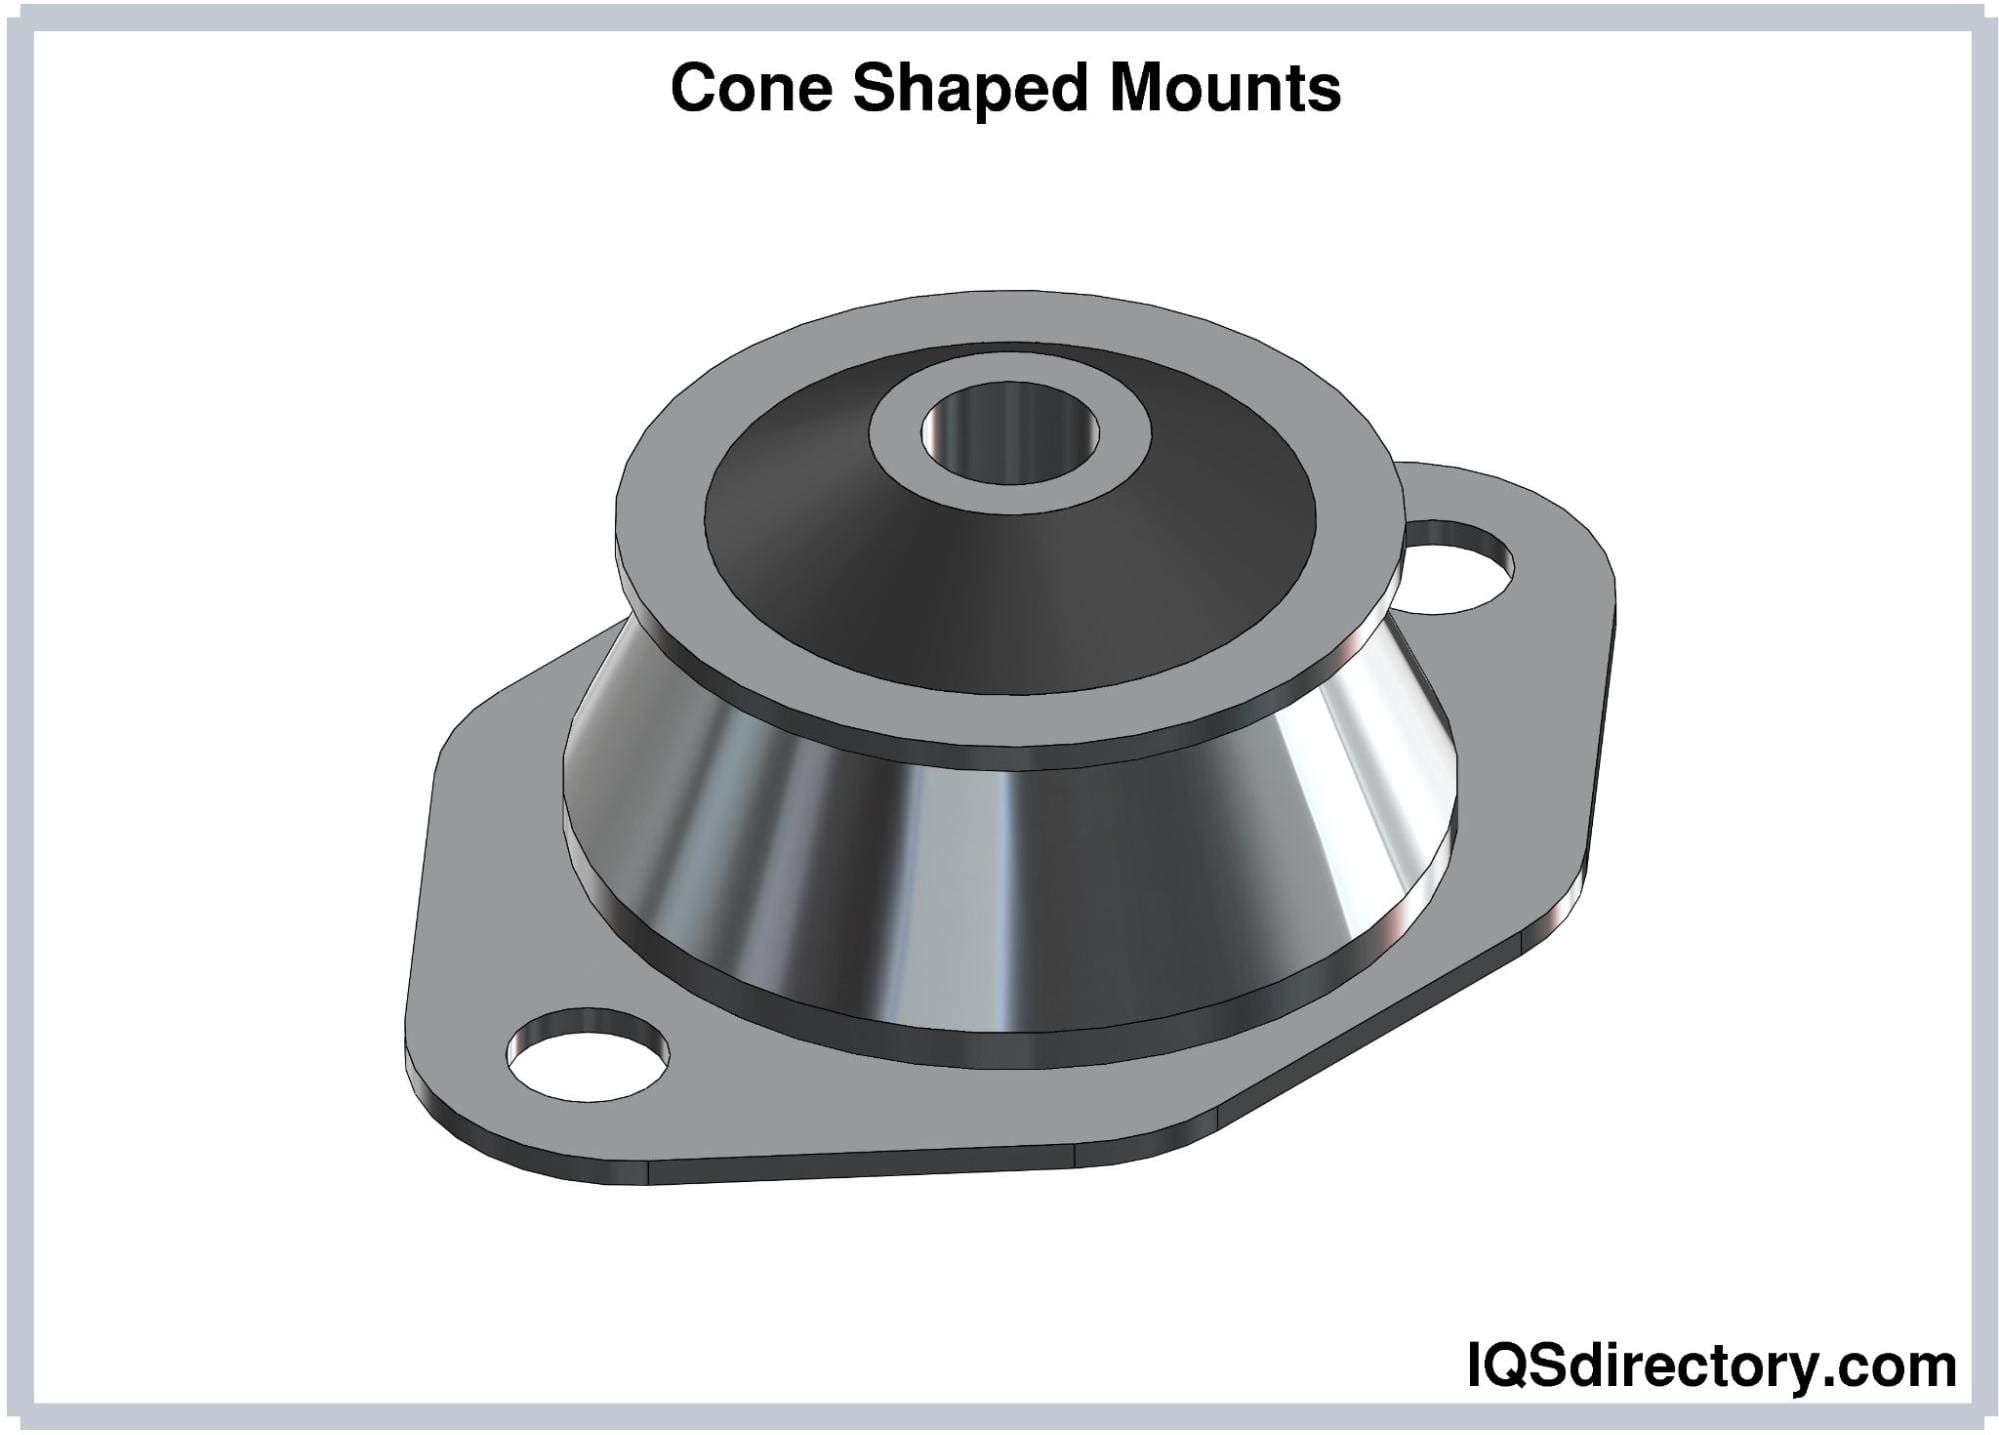 Cone Shaped Mounts